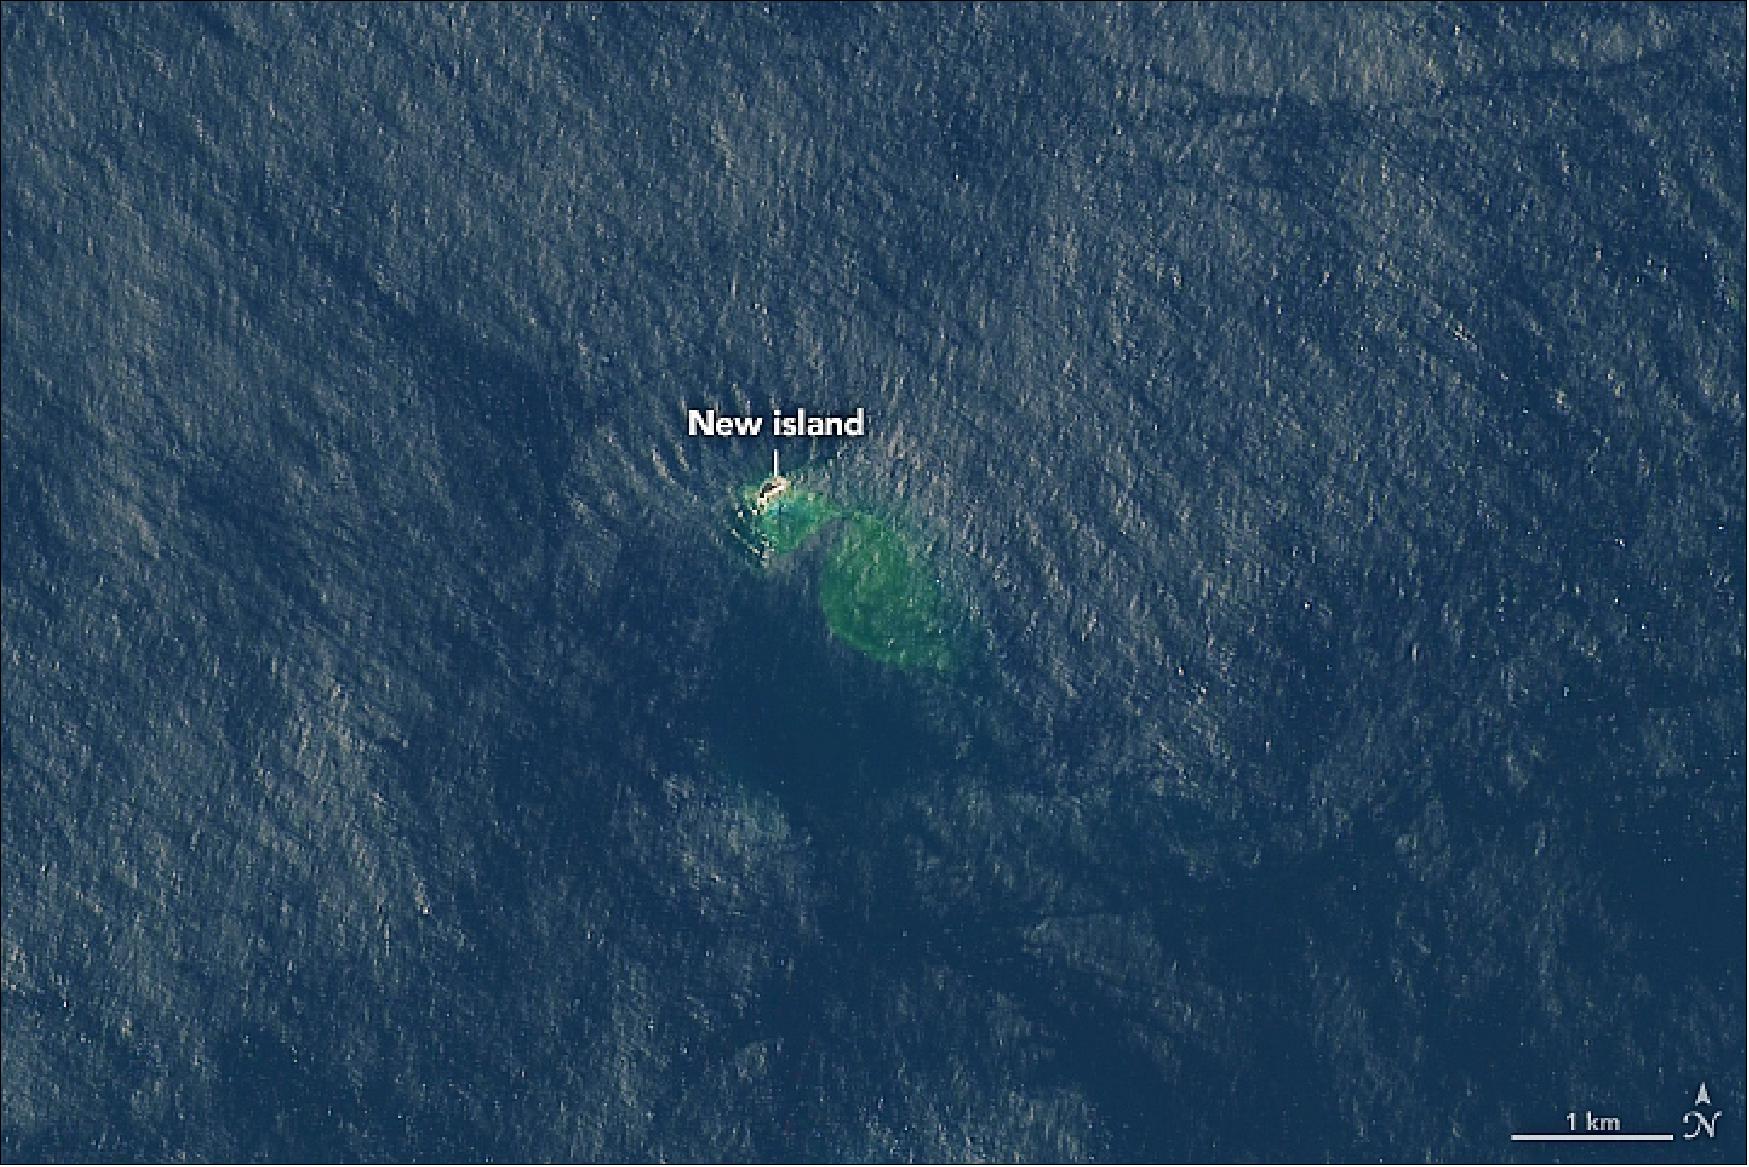 Figure 13: When the plume cleared on November 1, satellites started getting clear views of the new land that had emerged. Landsat-8 acquired the second, natural-color image of Lateiki Island on 17 November. Note that water around the island was still discolored from the eruption’s emissions. The new island measures about 400 meters (1300 feet) long and 100 meters (300 feet) wide (image credit: NASA Earth Observatory, image by Lauren Dauphin, using Landsat data from the U.S. Geological Survey. Story by Kathryn Hansen)